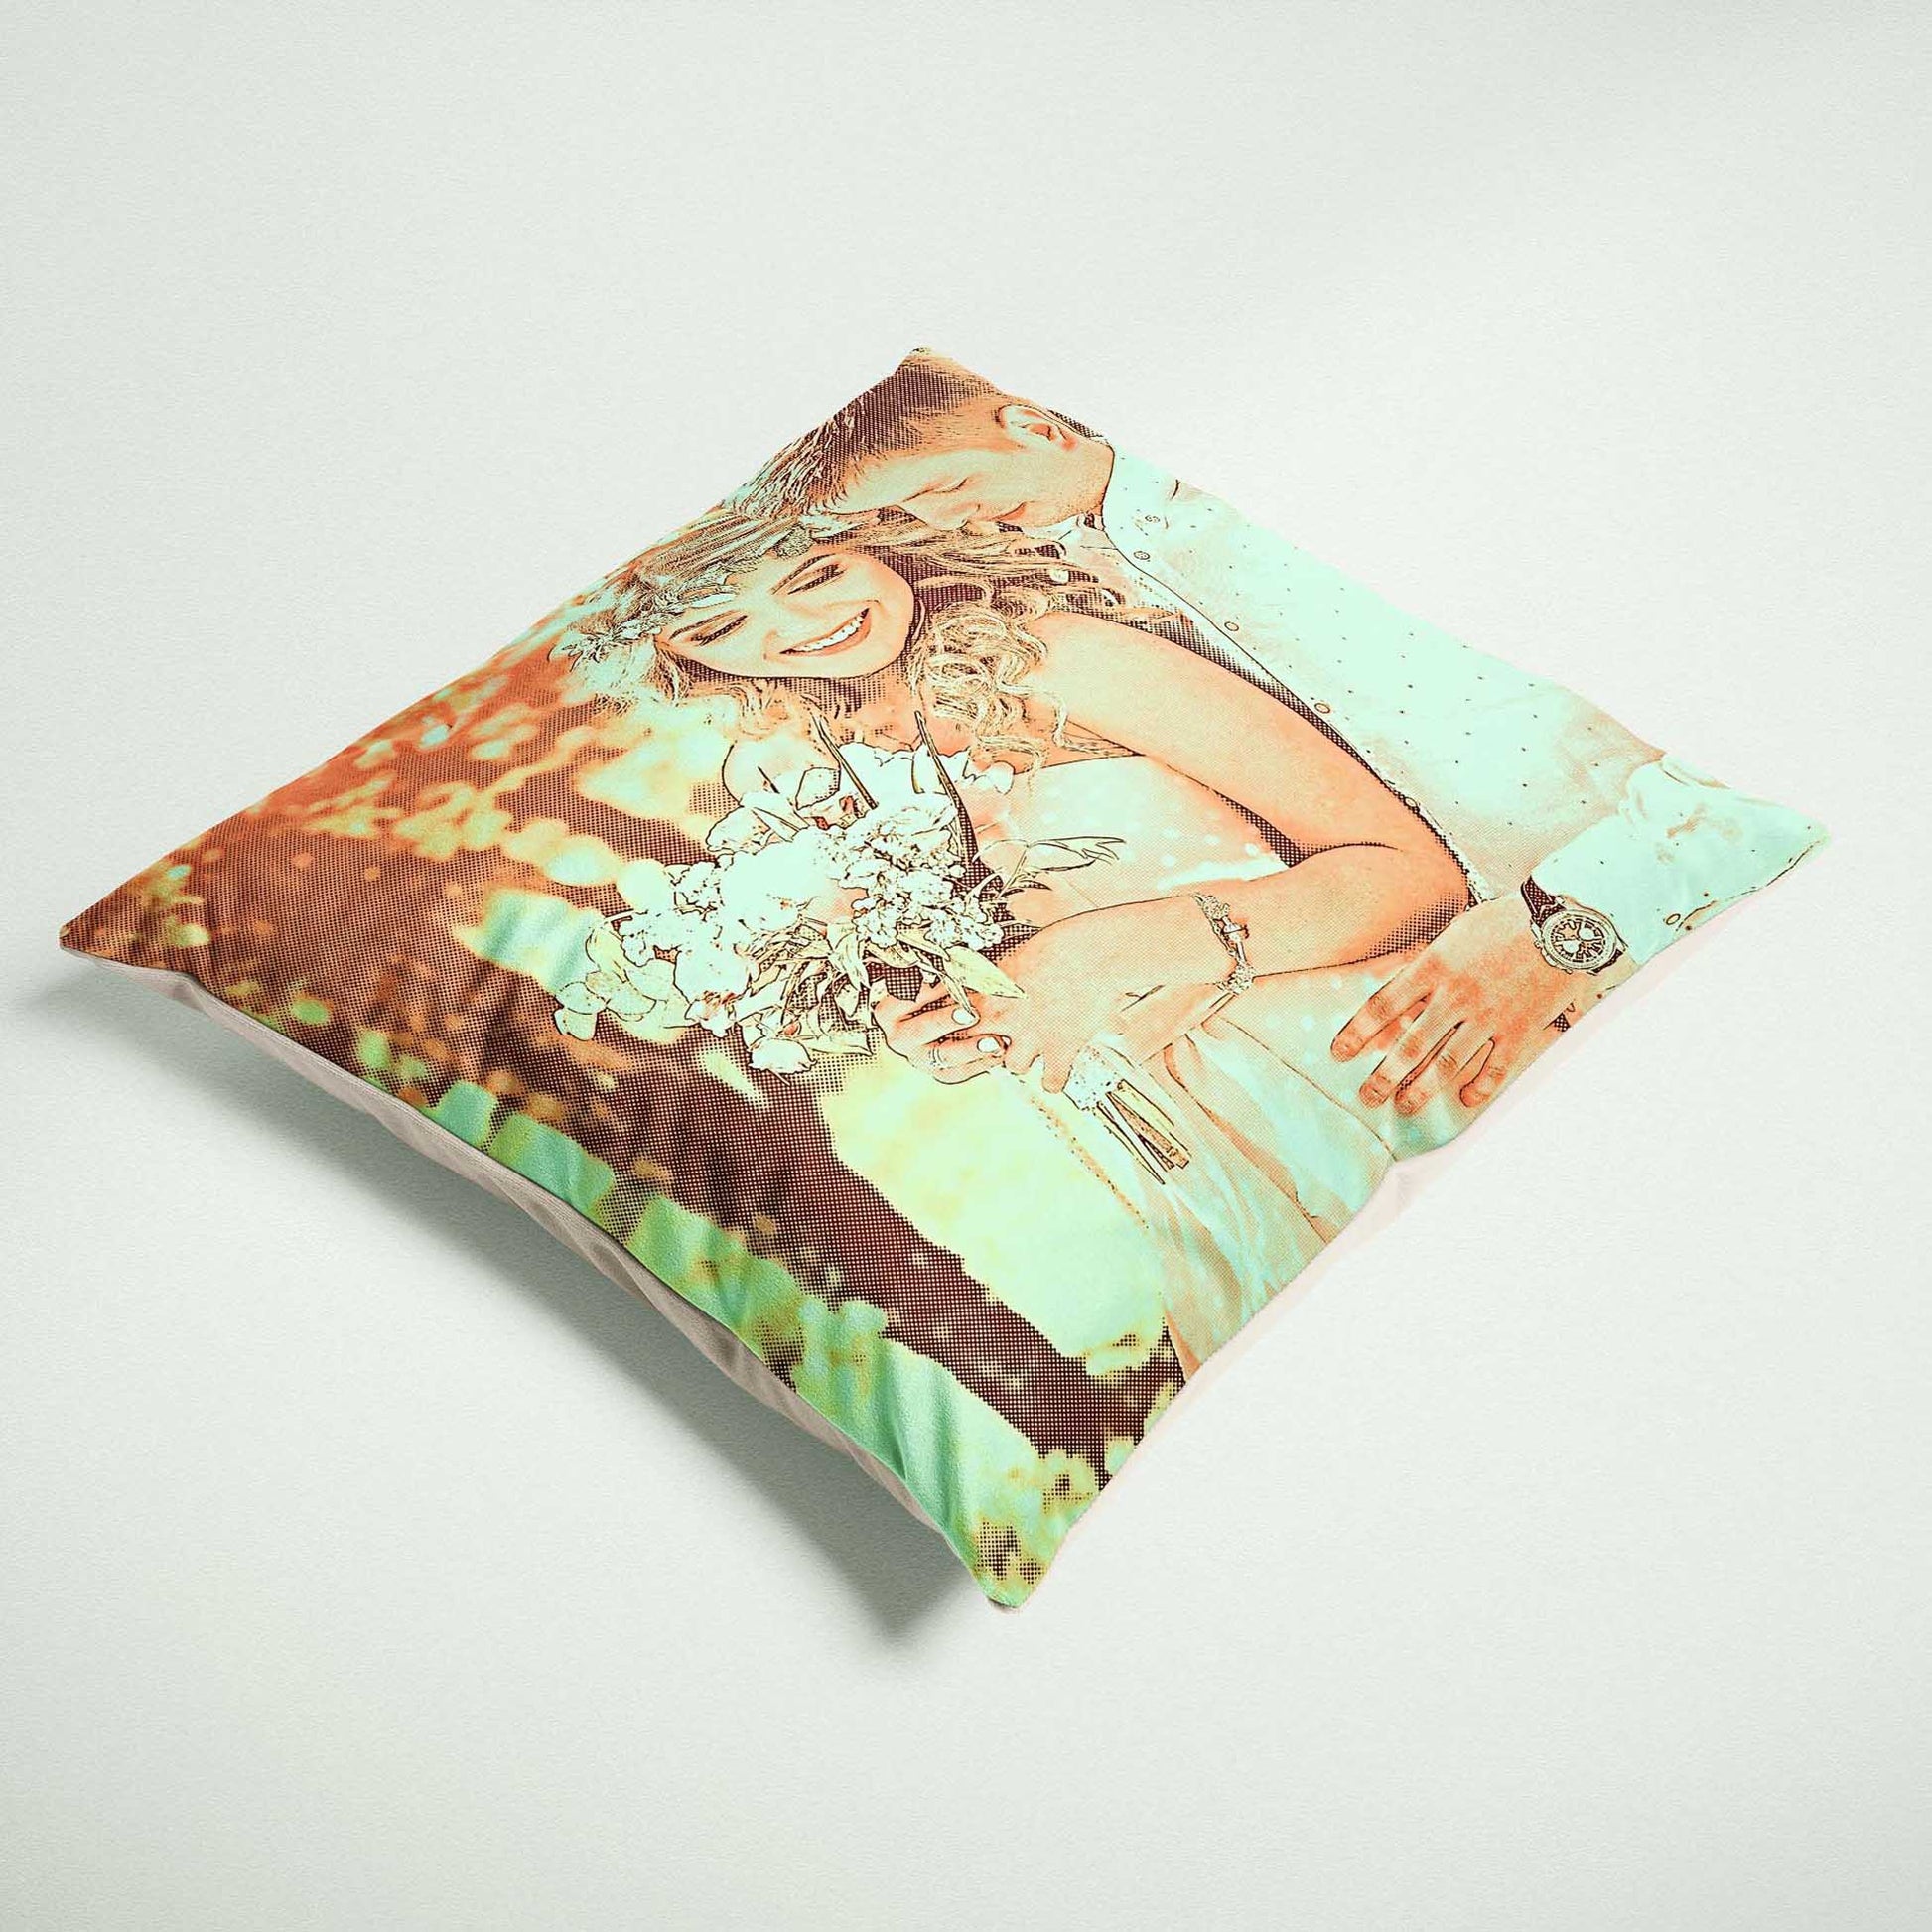 Transform your living space into a modern oasis with the Personalised Orange and Green Cushion. This unique cushion showcases a custom digital art print, created from your cherished photo, adding a fresh and cool vibe to your home decor